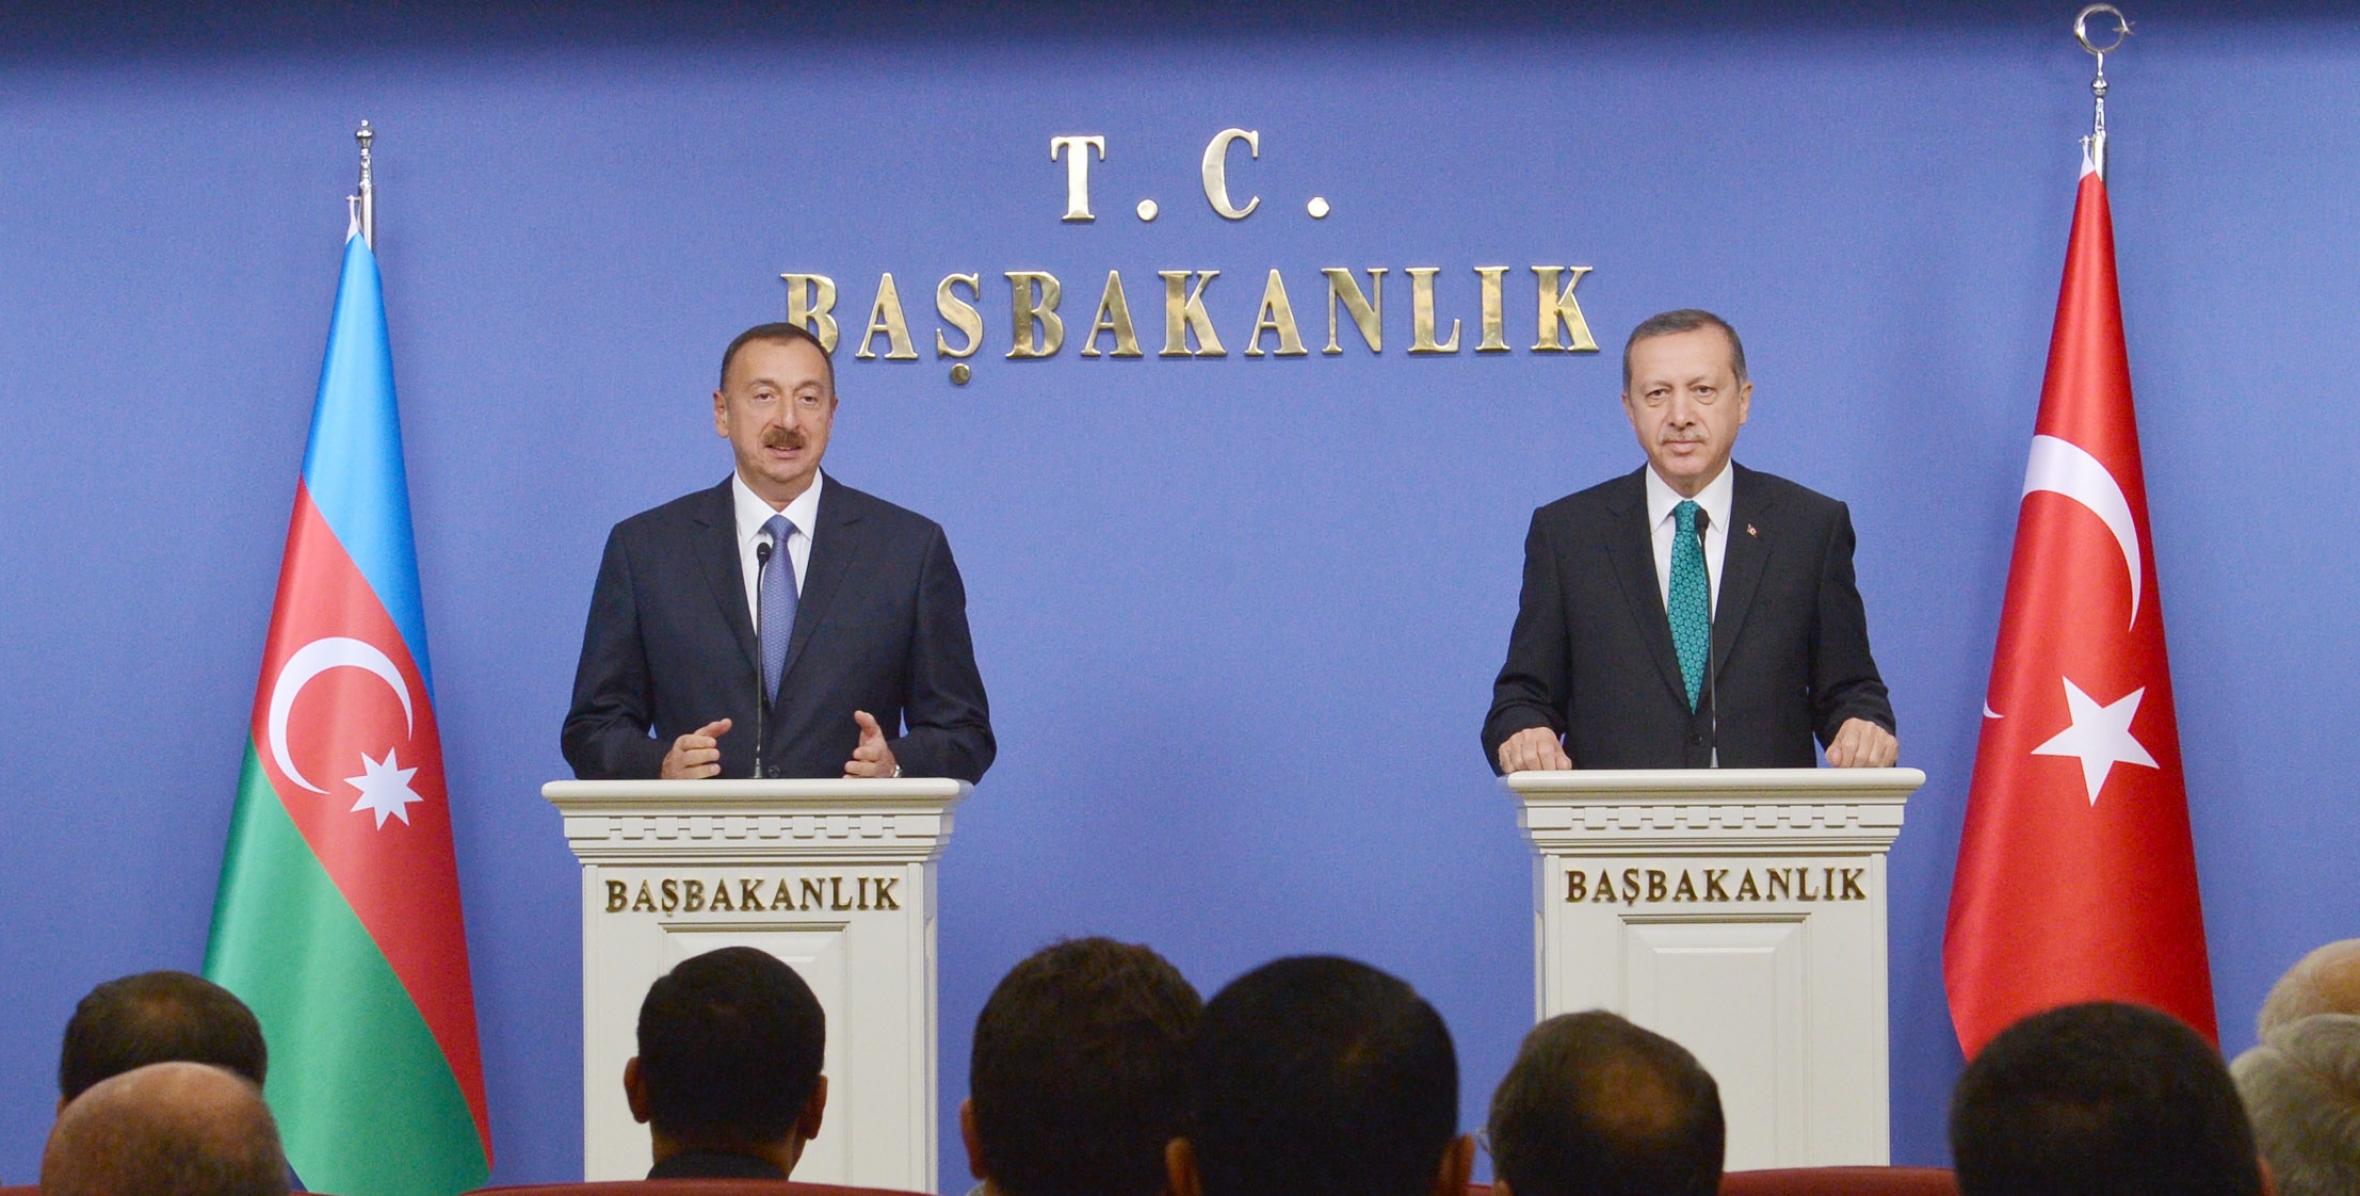 Ilham Aliyev and Turkish Prime Minister Recep Tayyip Erdogan have held a press conference